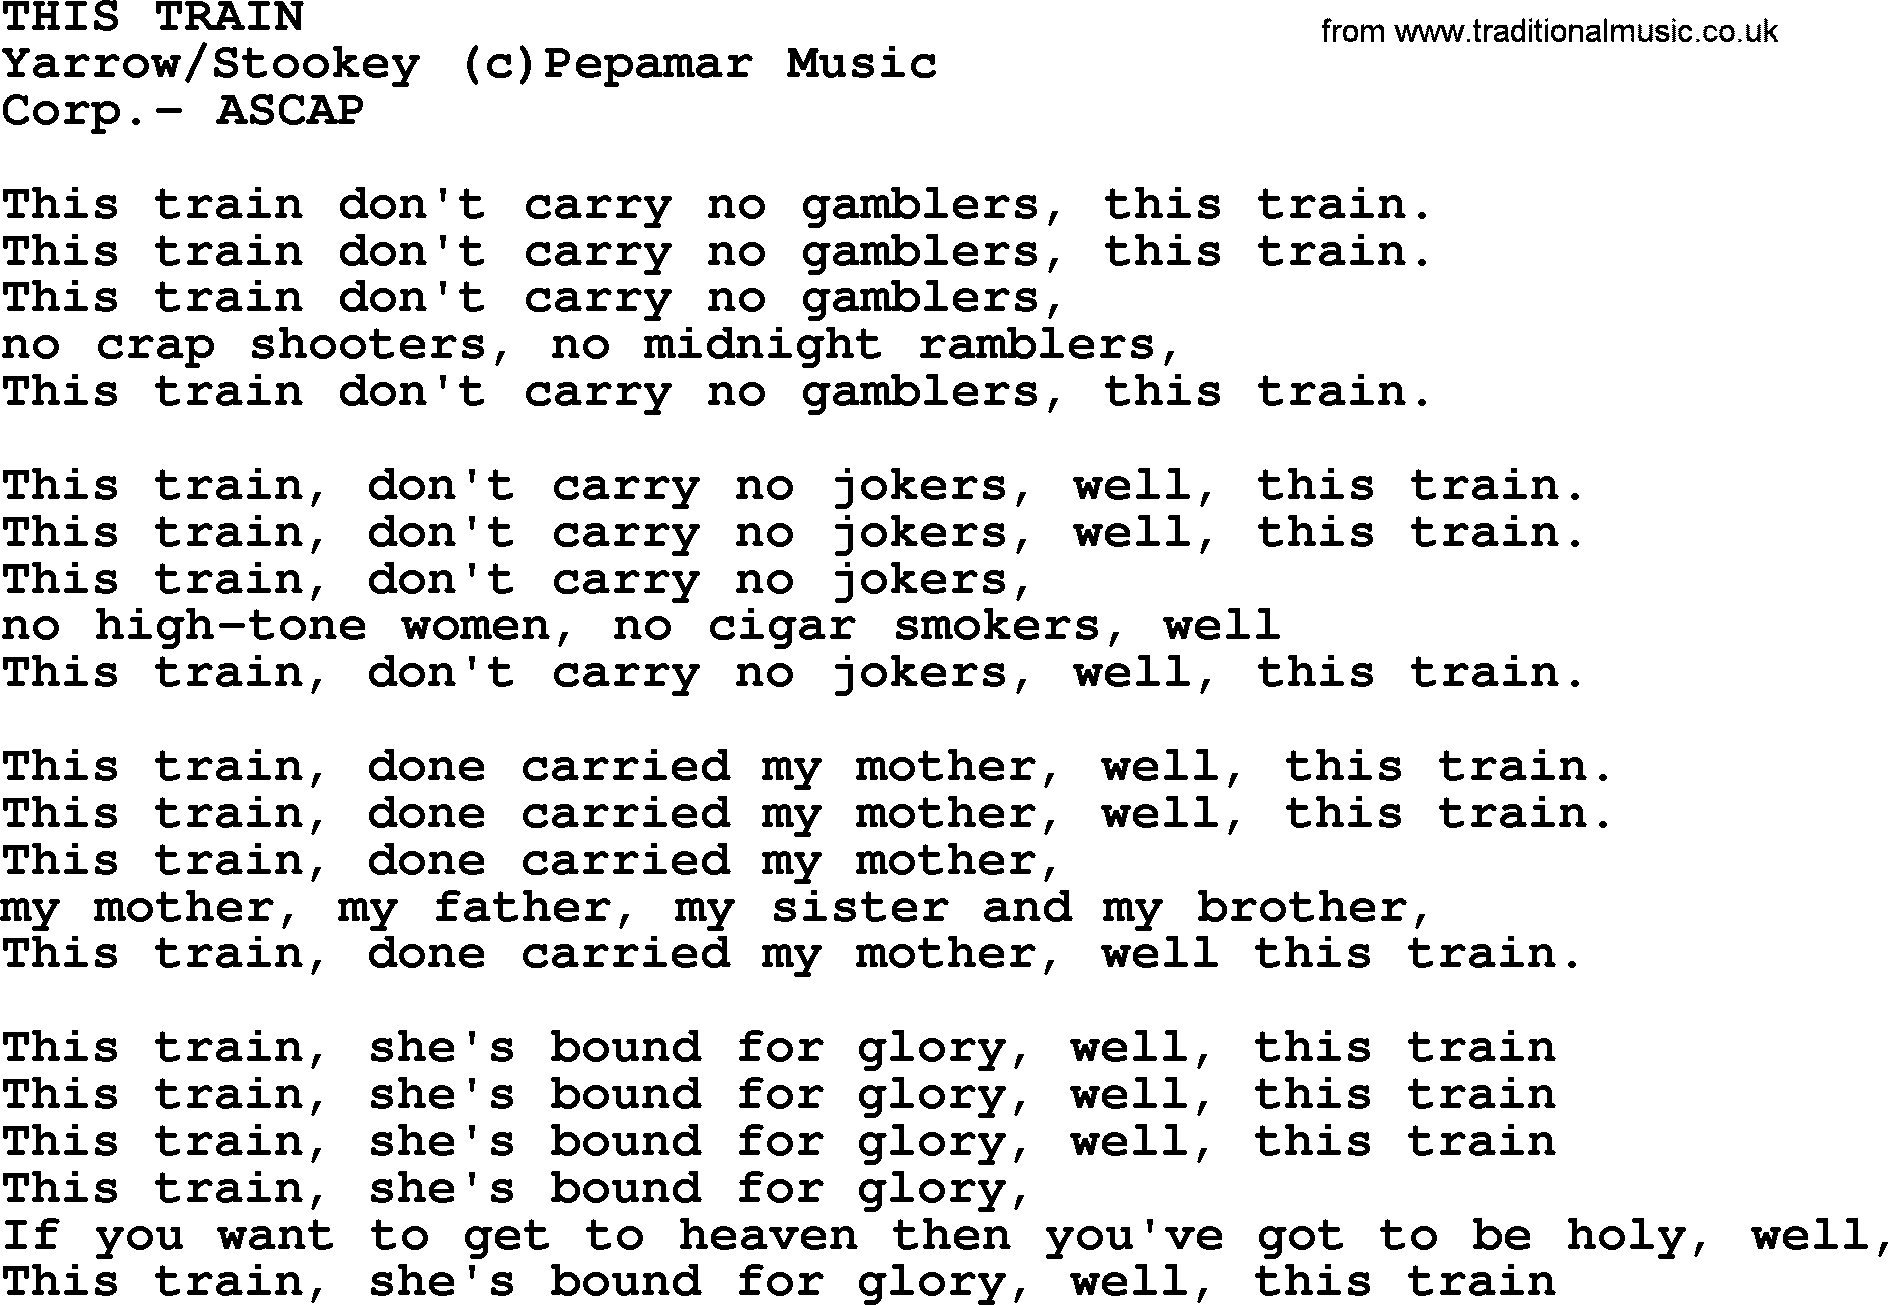 Peter, Paul and Mary song This Train lyrics